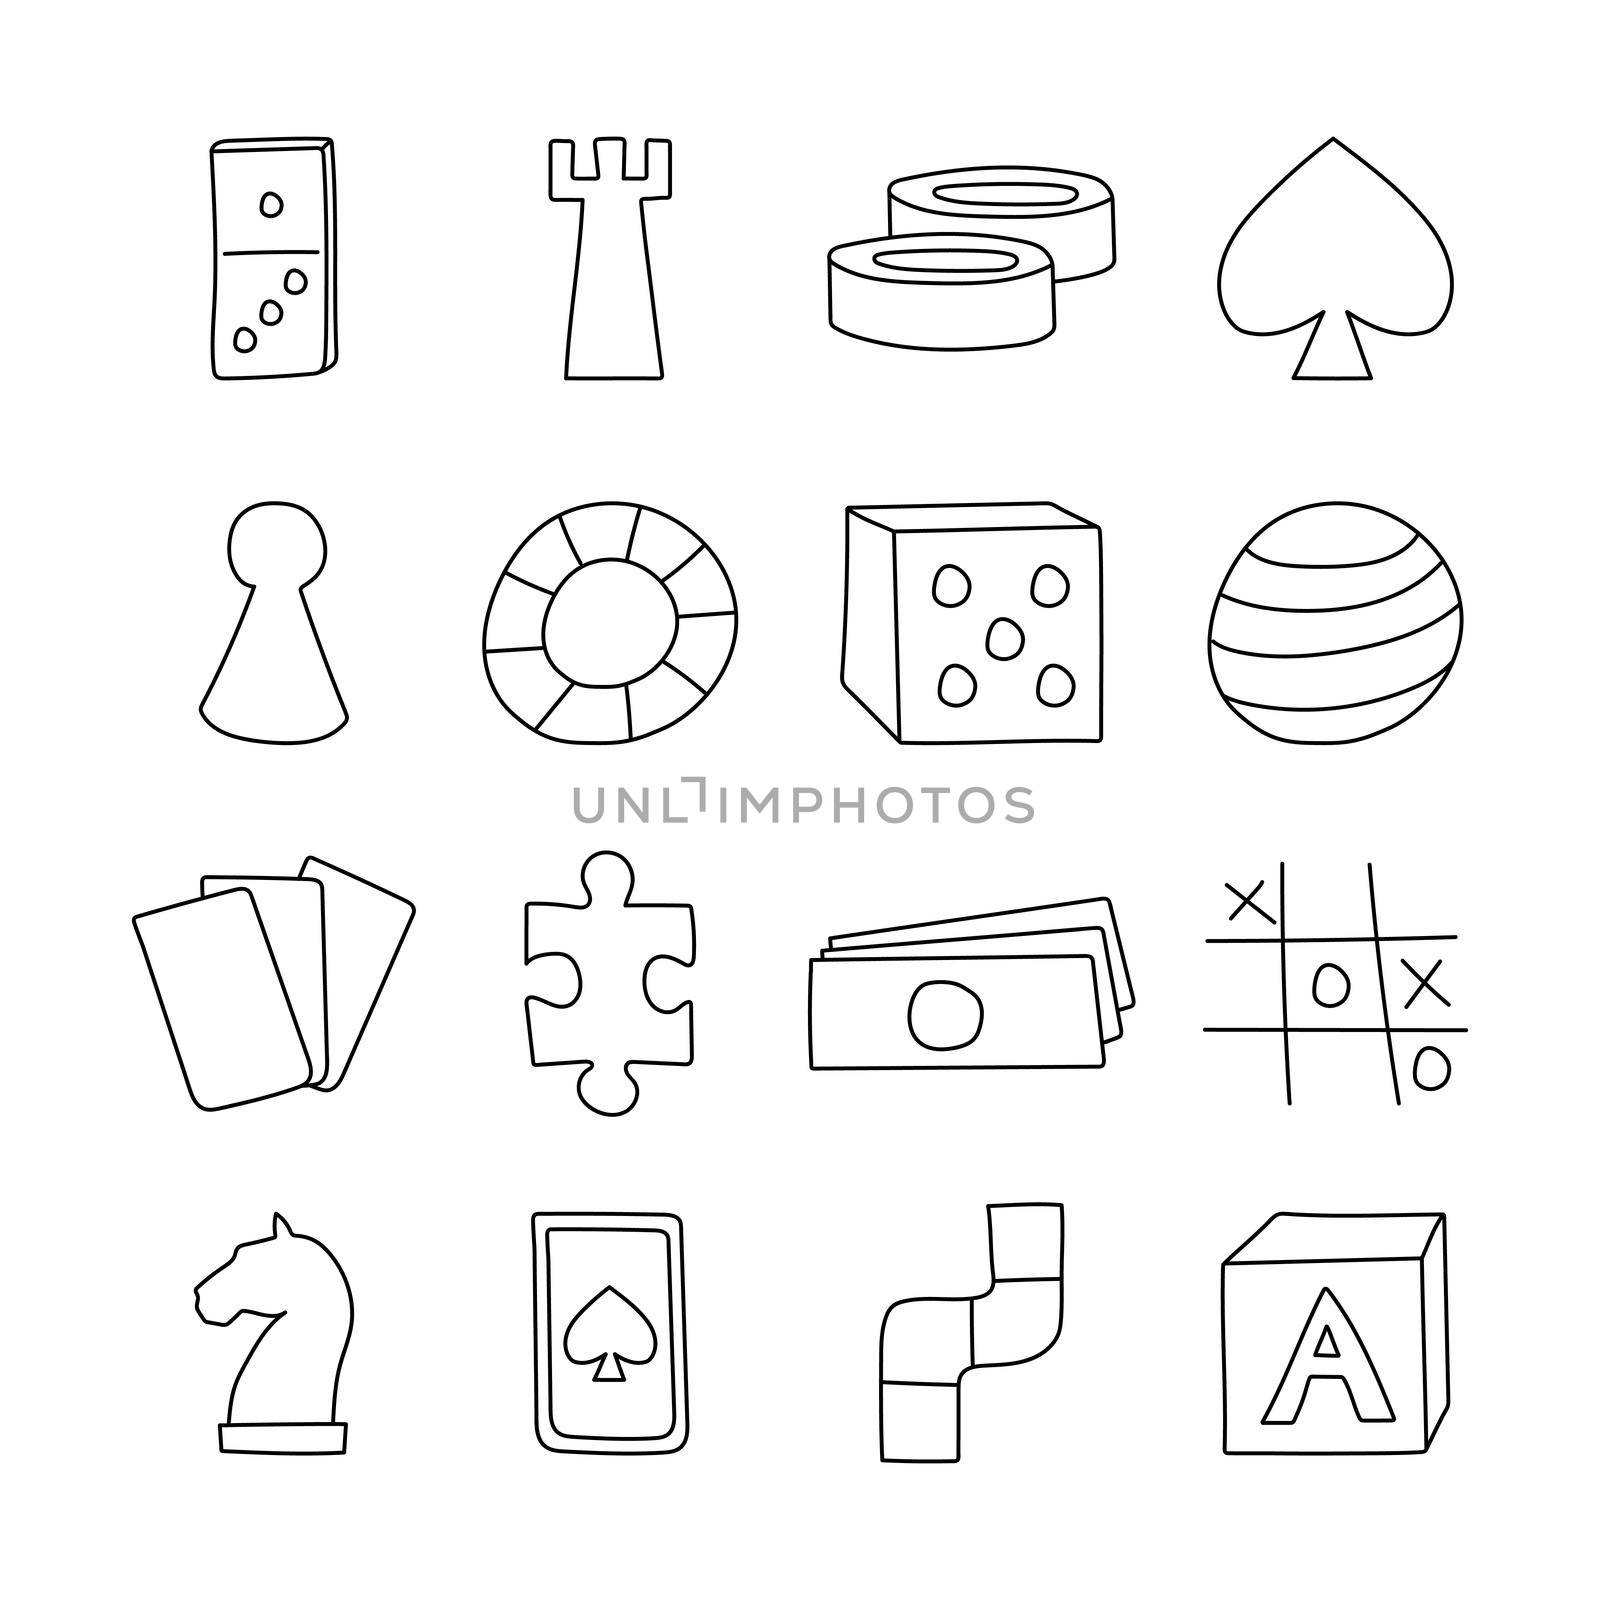 Board game icons in hand drawn cartoon style. Vector illustration. by natali_brill